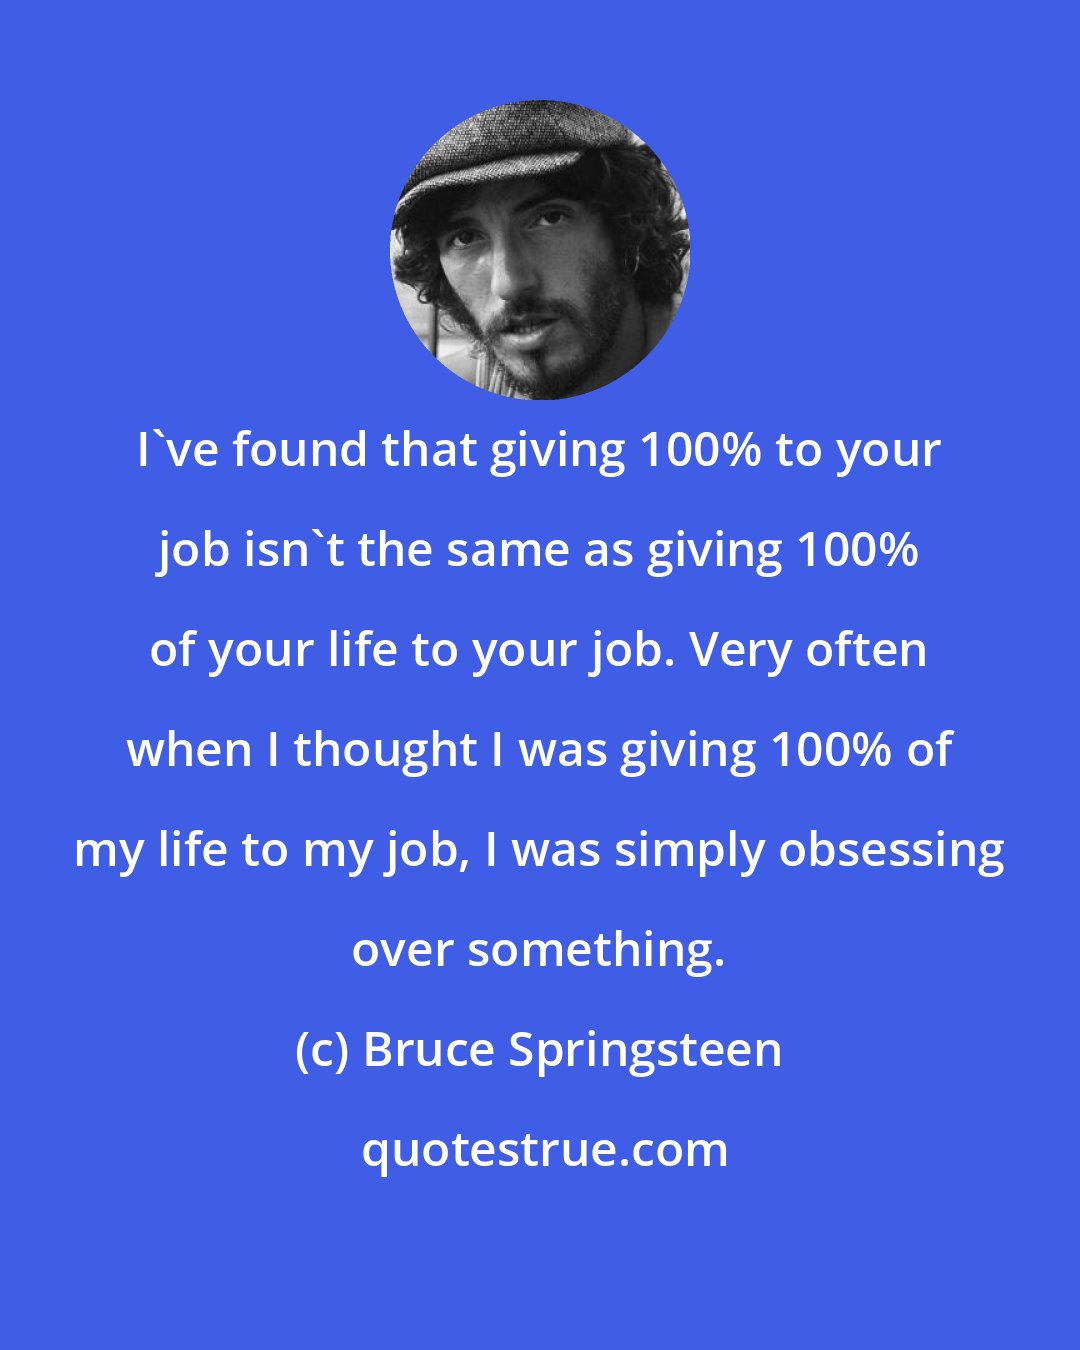 Bruce Springsteen: I've found that giving 100% to your job isn't the same as giving 100% of your life to your job. Very often when I thought I was giving 100% of my life to my job, I was simply obsessing over something.